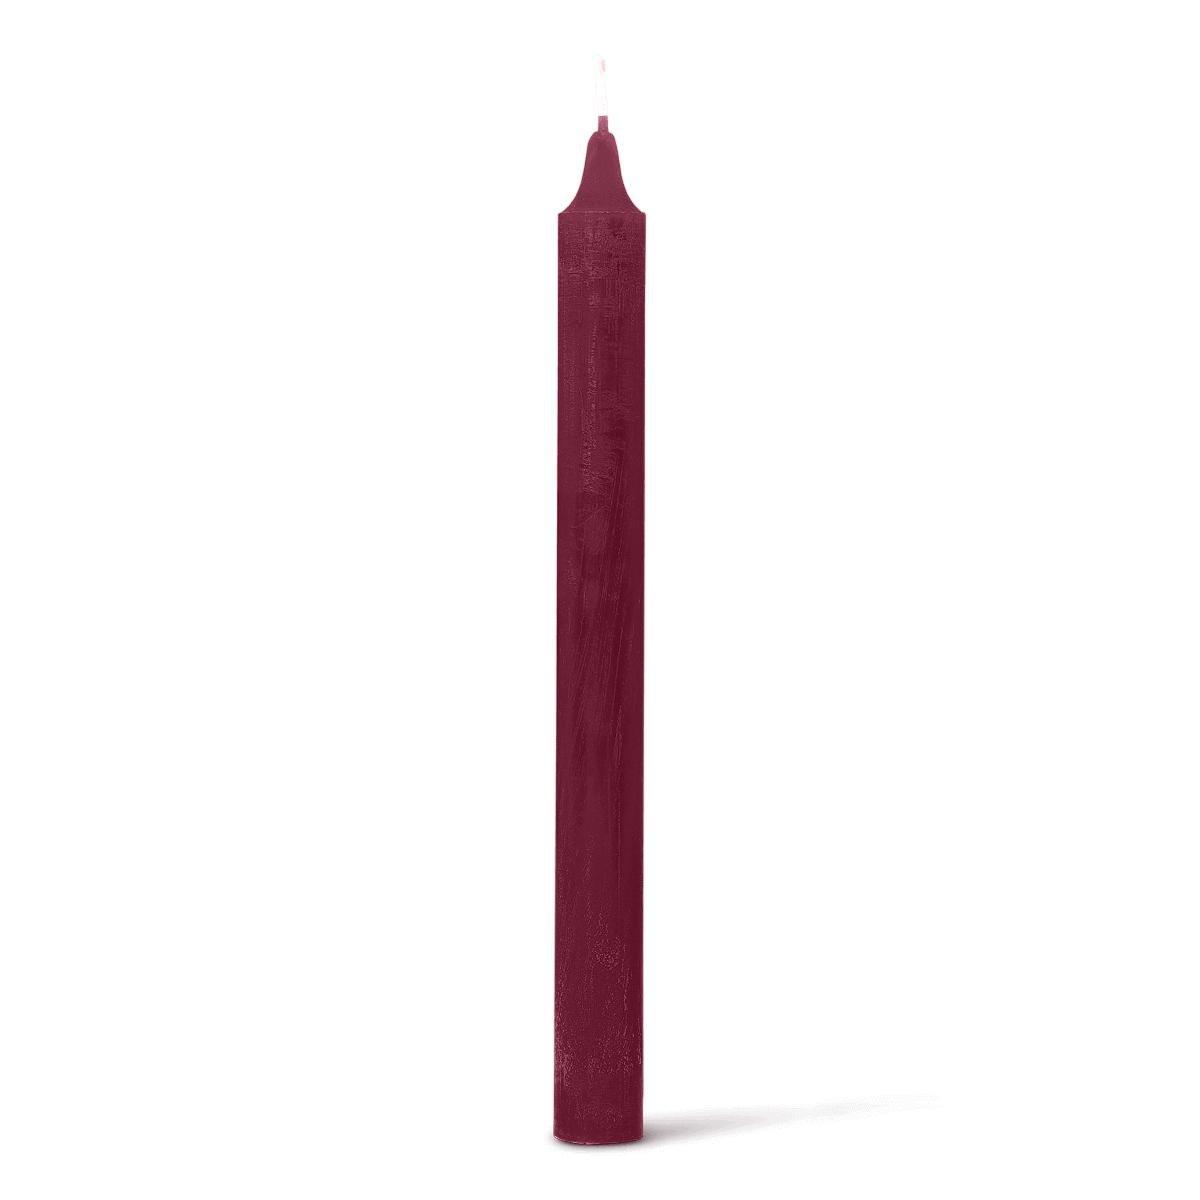 Maroon candle. 25 cm